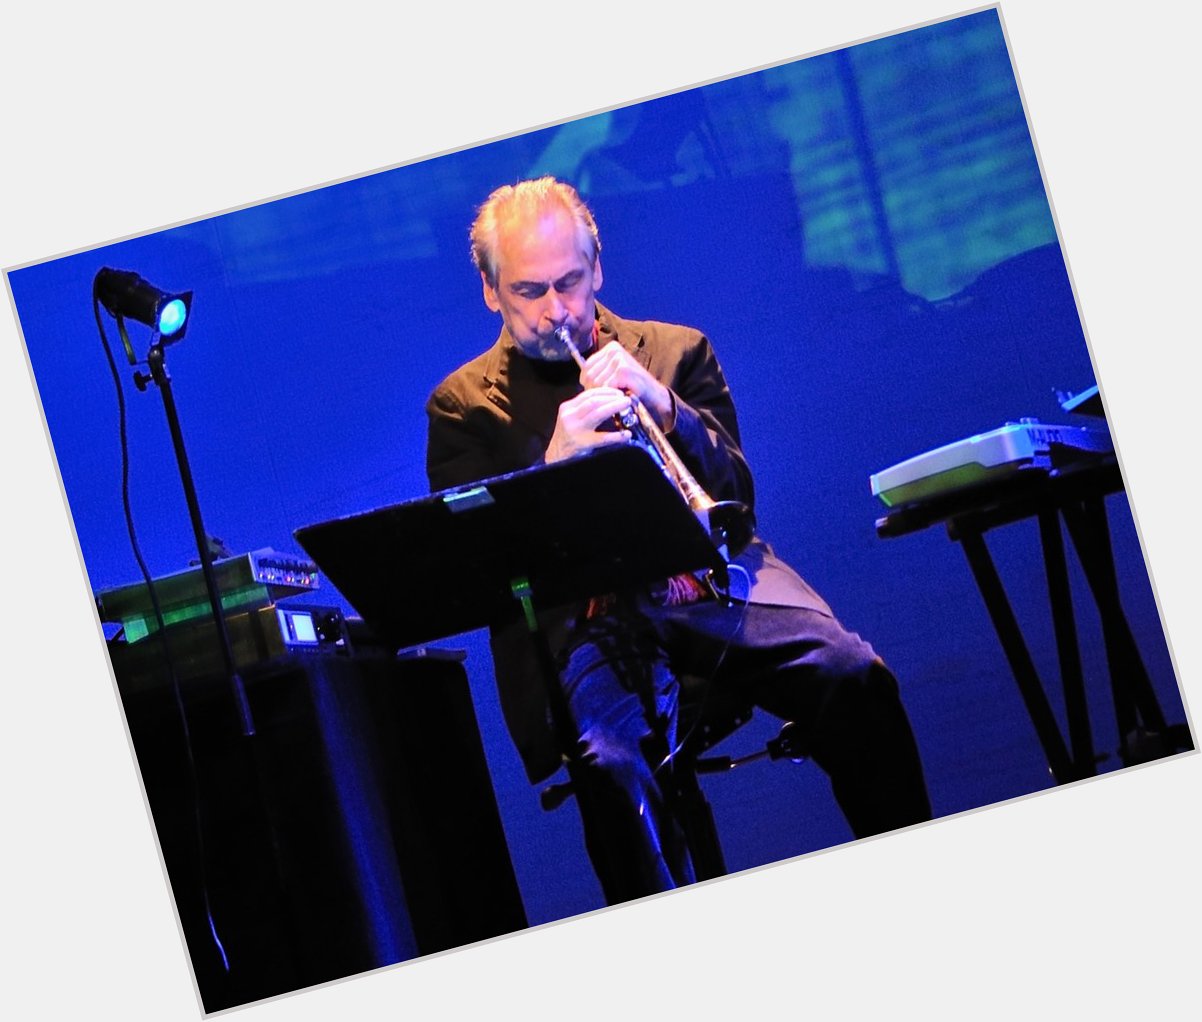 Wishing the great Jon Hassell a very happy 80th birthday!   